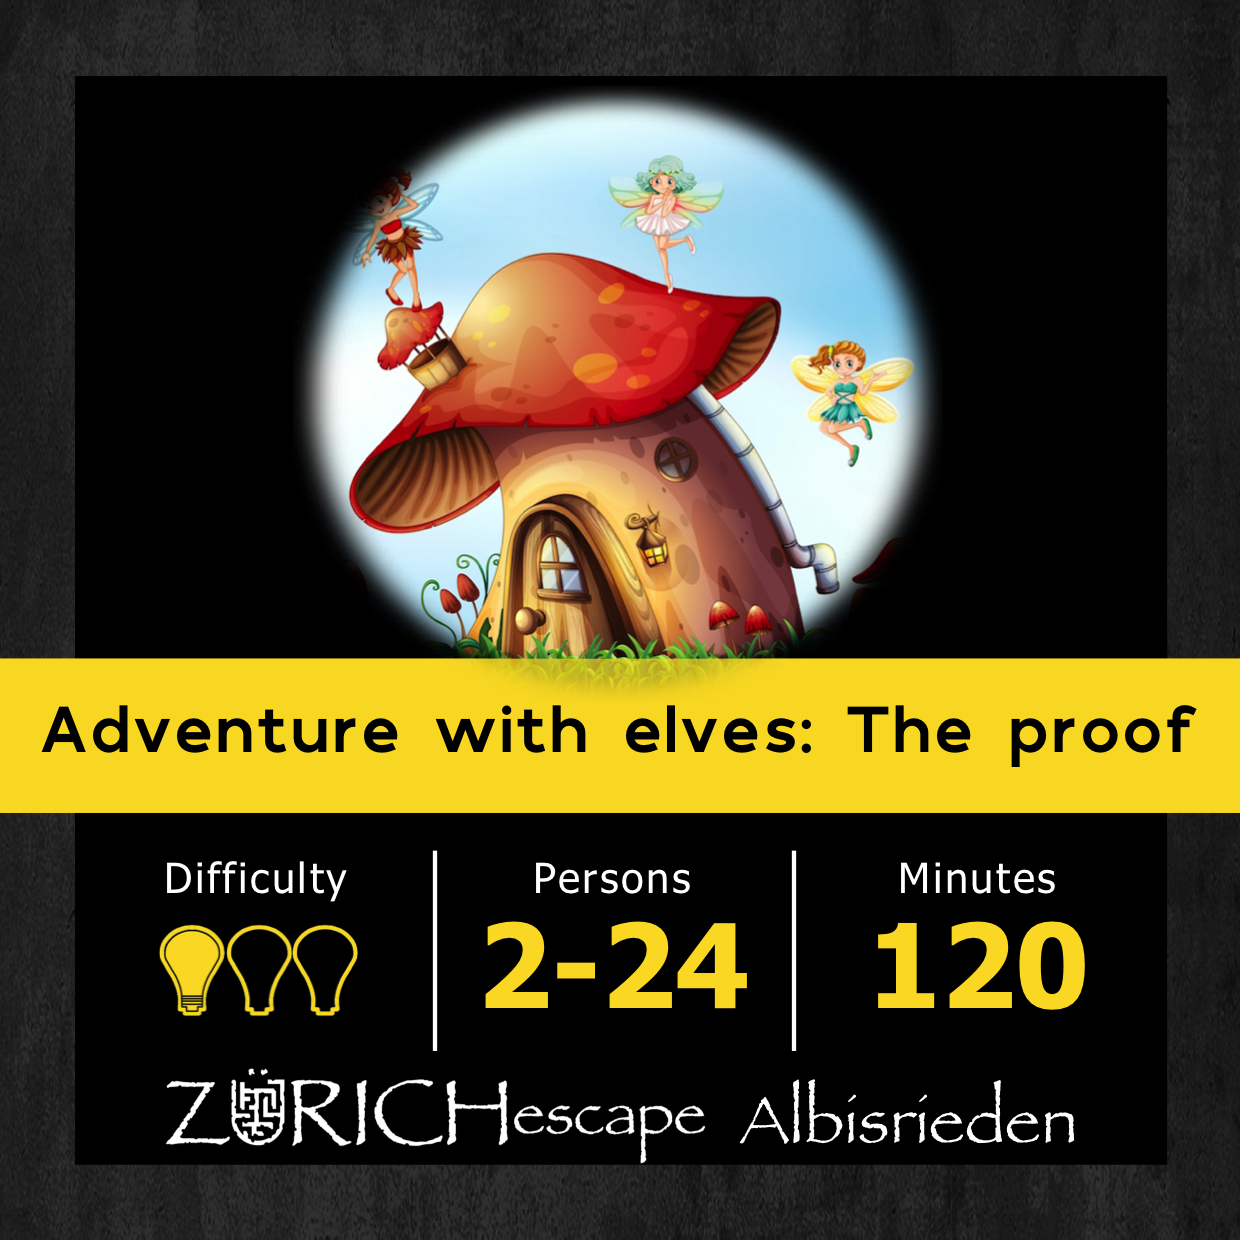 Adventure with elves: the proof zurich albisrieden, foxtrail children zurich albisrieden, foxtrail familie zurich albisrieden, escape game children zurich albisrieden, outdoor escape game children zurich albisrieden, outdoor escape room children zurich albisrieden, schnitzeljagd children zurich albisrieden, schatzsuche children zurich albisrieden, urbanmission children zurich albisrieden, city game children zurich albisrieden, treasure hunt children zurich albisrieden, scavenger game children zurich albisrieden, outdoor spiel children zurich albisrieden, outdoor game children zurich albisrieden, escape mission children zurich albisrieden, outdoor escape mission children zurich albisrieden, escape game familie zurich albisrieden, outdoor escape game familie zurich albisrieden, outdoor escape room familie zurich albisrieden, schnitzeljagd familie zurich albisrieden, schatzsuche familie zurich albisrieden, urbanmission familie zurich albisrieden, city game familie zurich albisrieden, treasure hunt familie zurich albisrieden, scavenger game familie zurich albisrieden, outdoor spiel familie zurich albisrieden, outdoor game familie zurich albisrieden, escape mission familie zurich albisrieden, outdoor escape mission familie zurich albisrieden